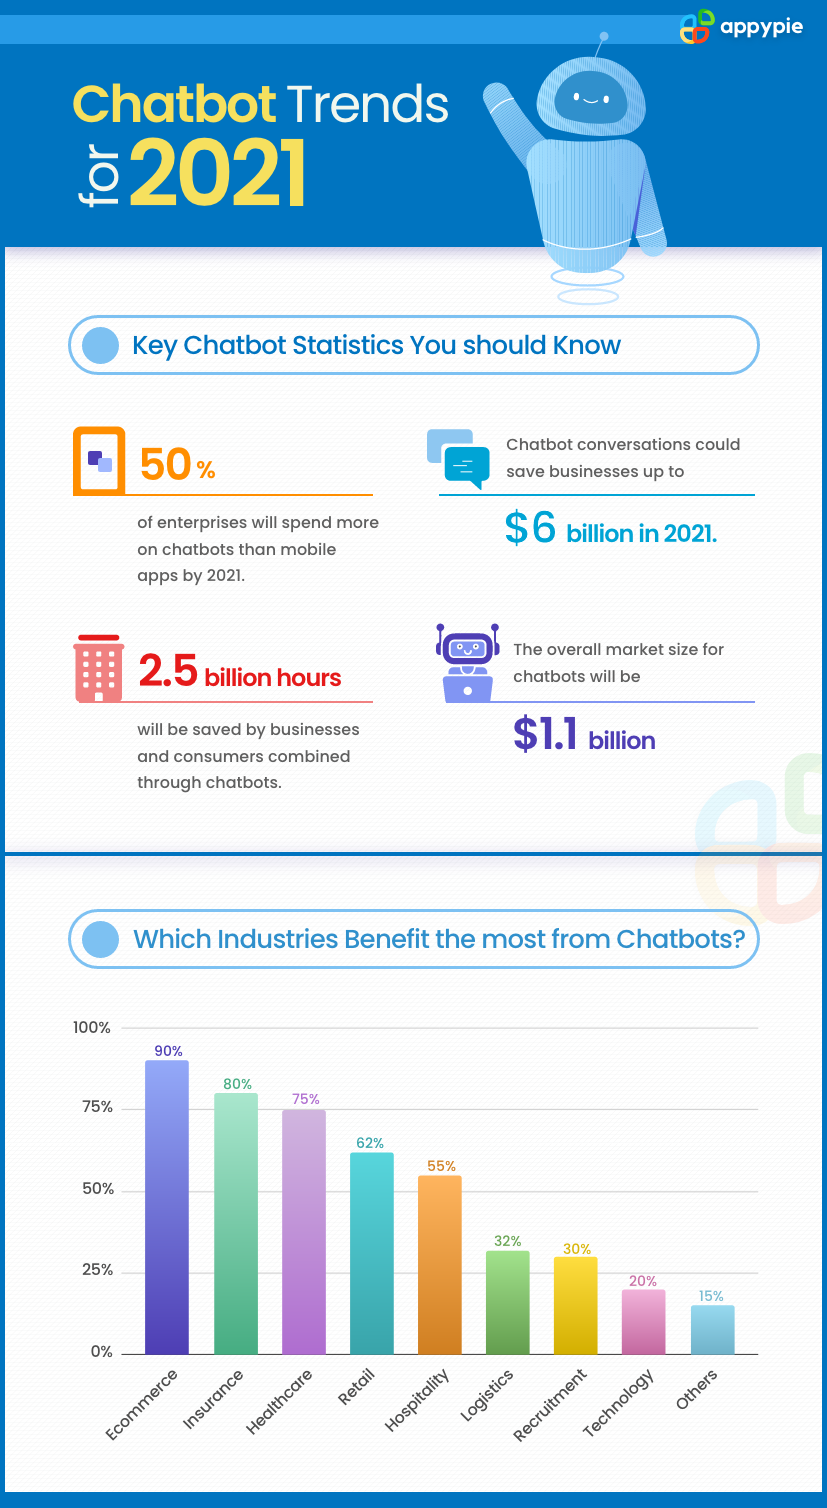 Top Chatbot Stats & Trends to Watch in 2021 - Appy Pie